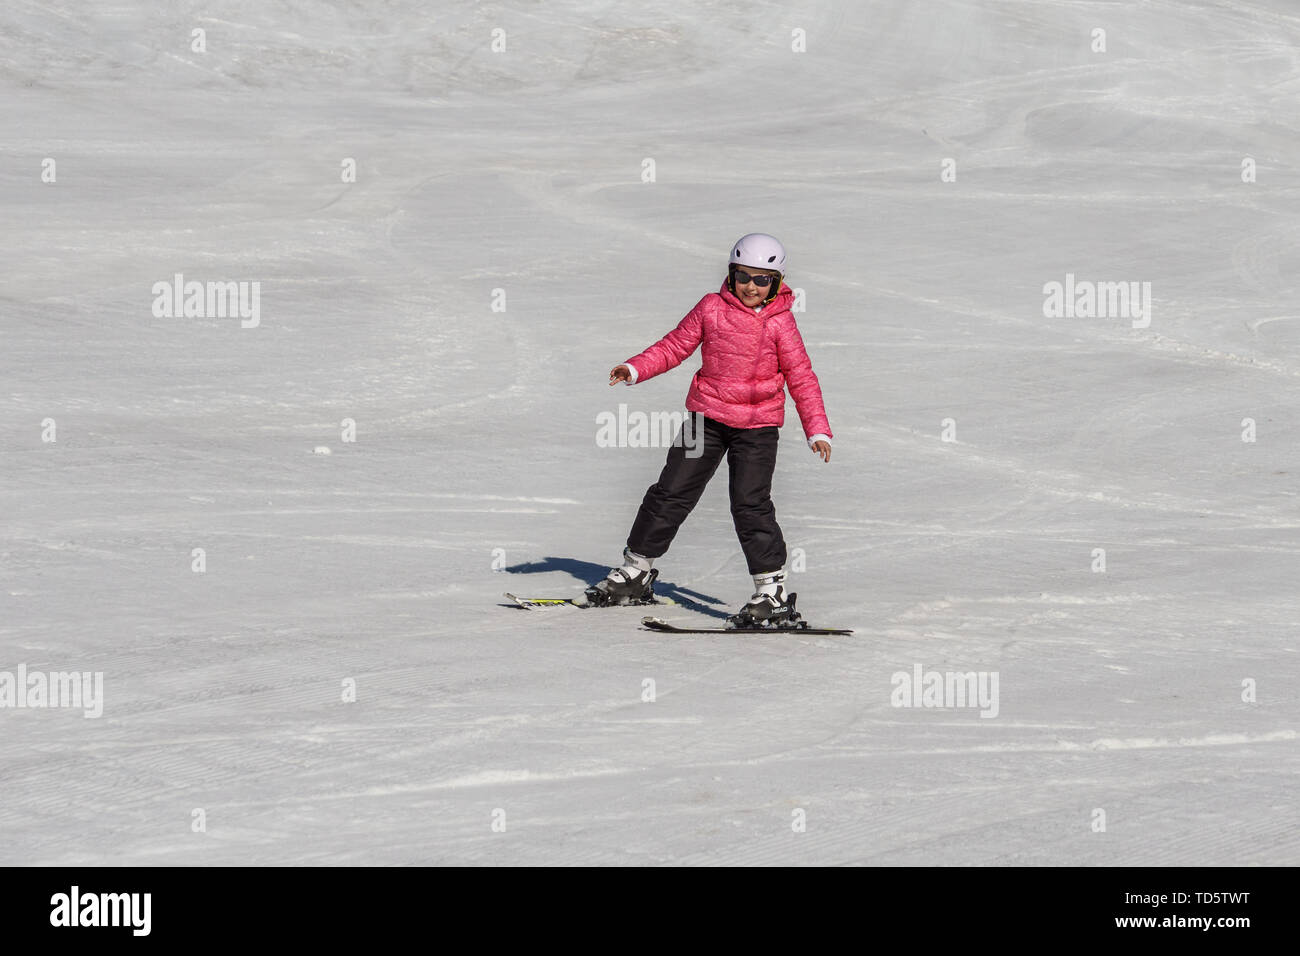 KIMBERLEY, CANADA - MARCH 22, 2019: Mountain Resort view early spring child skiing. Stock Photo